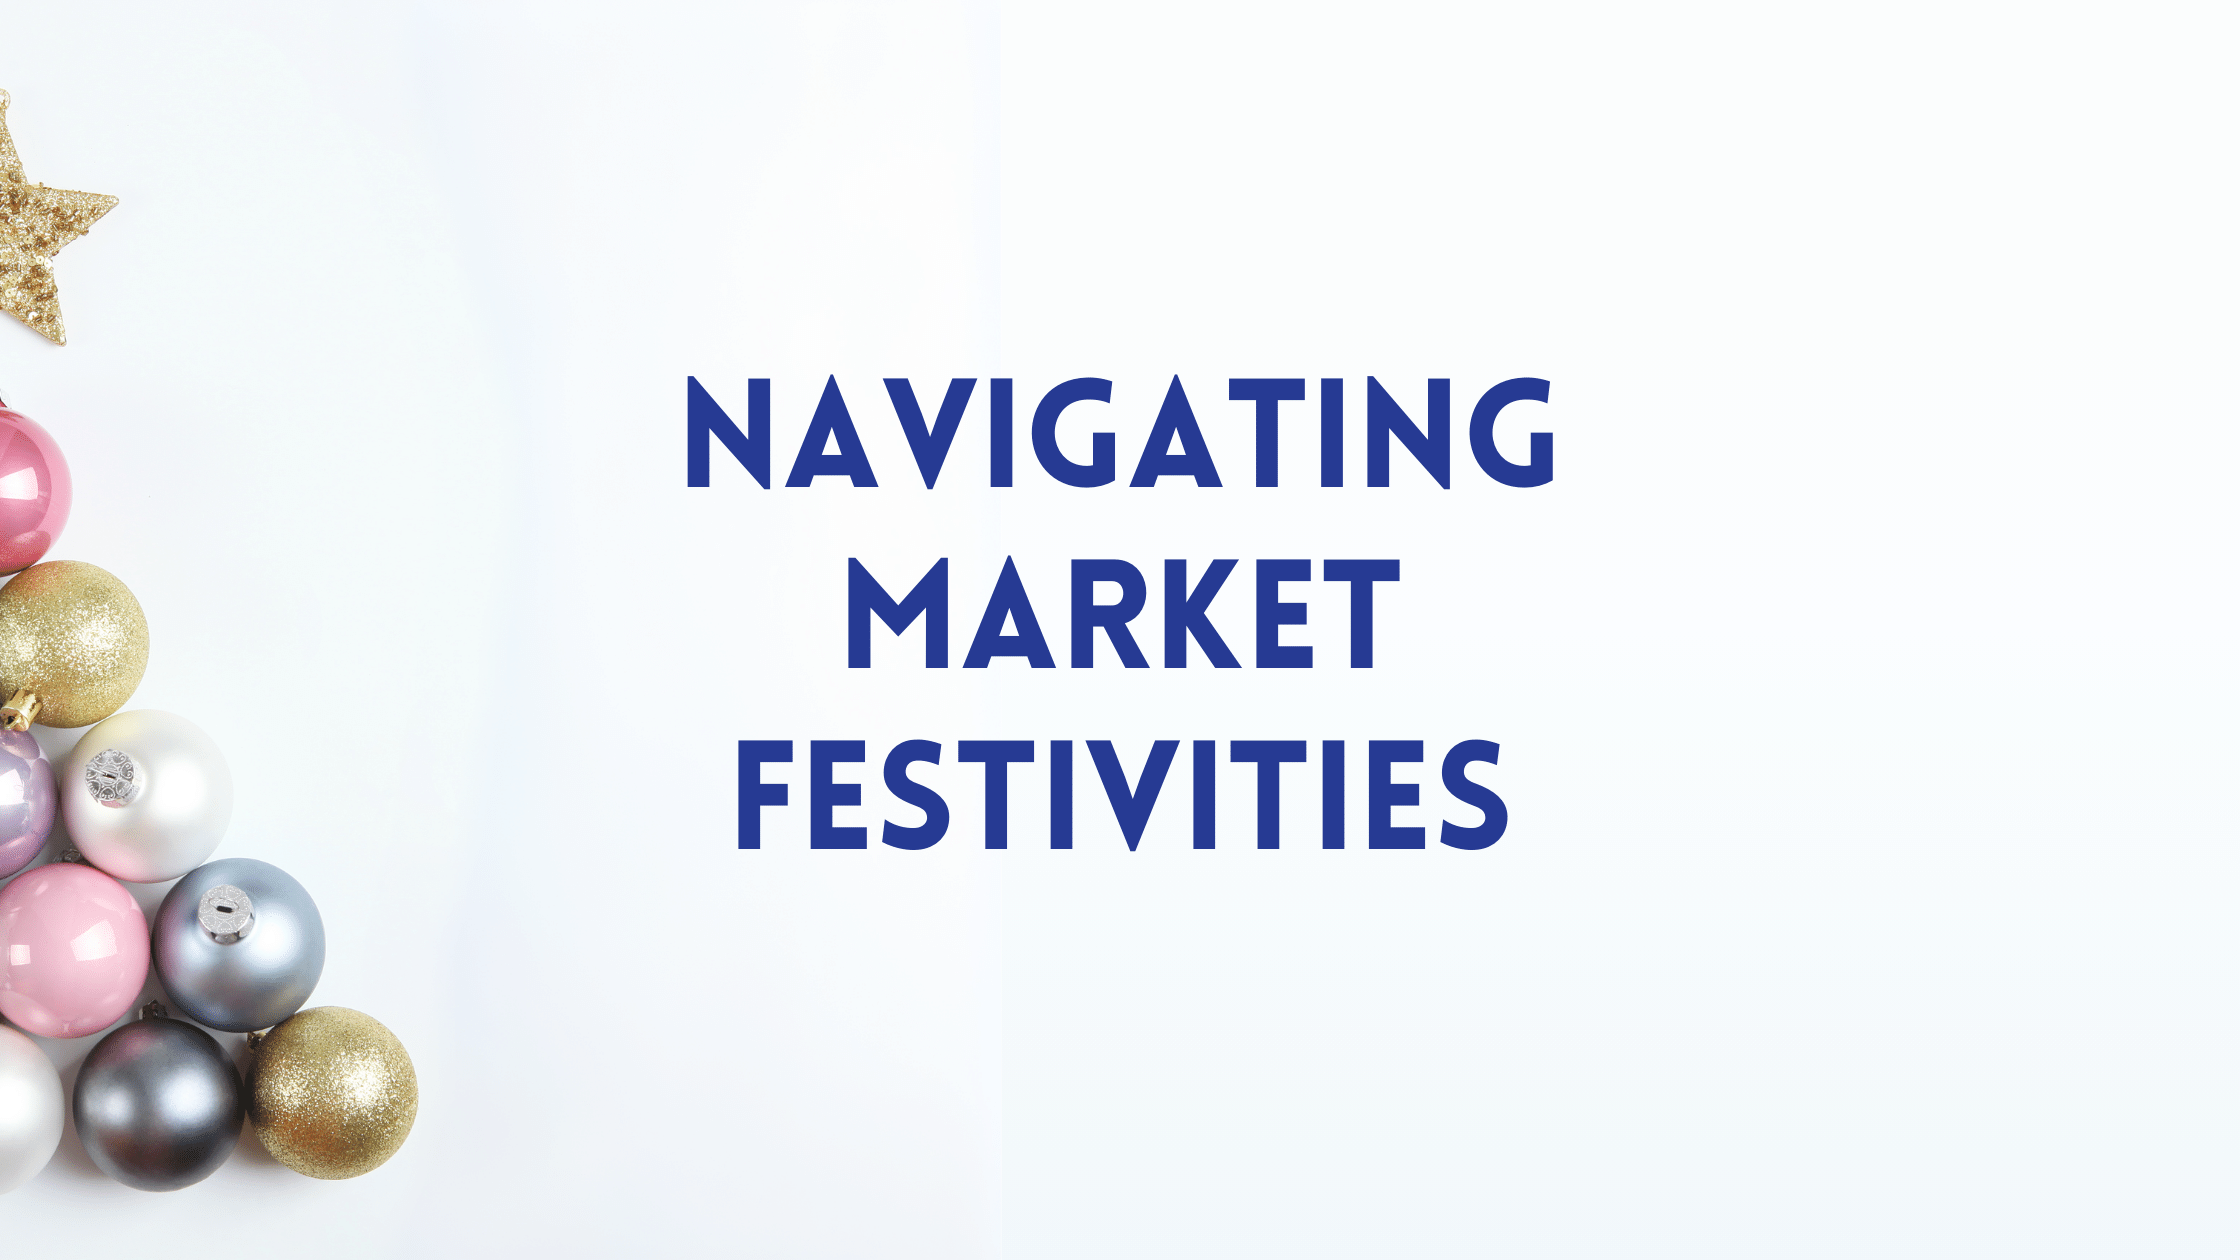 Navigating Market Festivities with Christmas ornaments arranged in a Christmas tree pattern